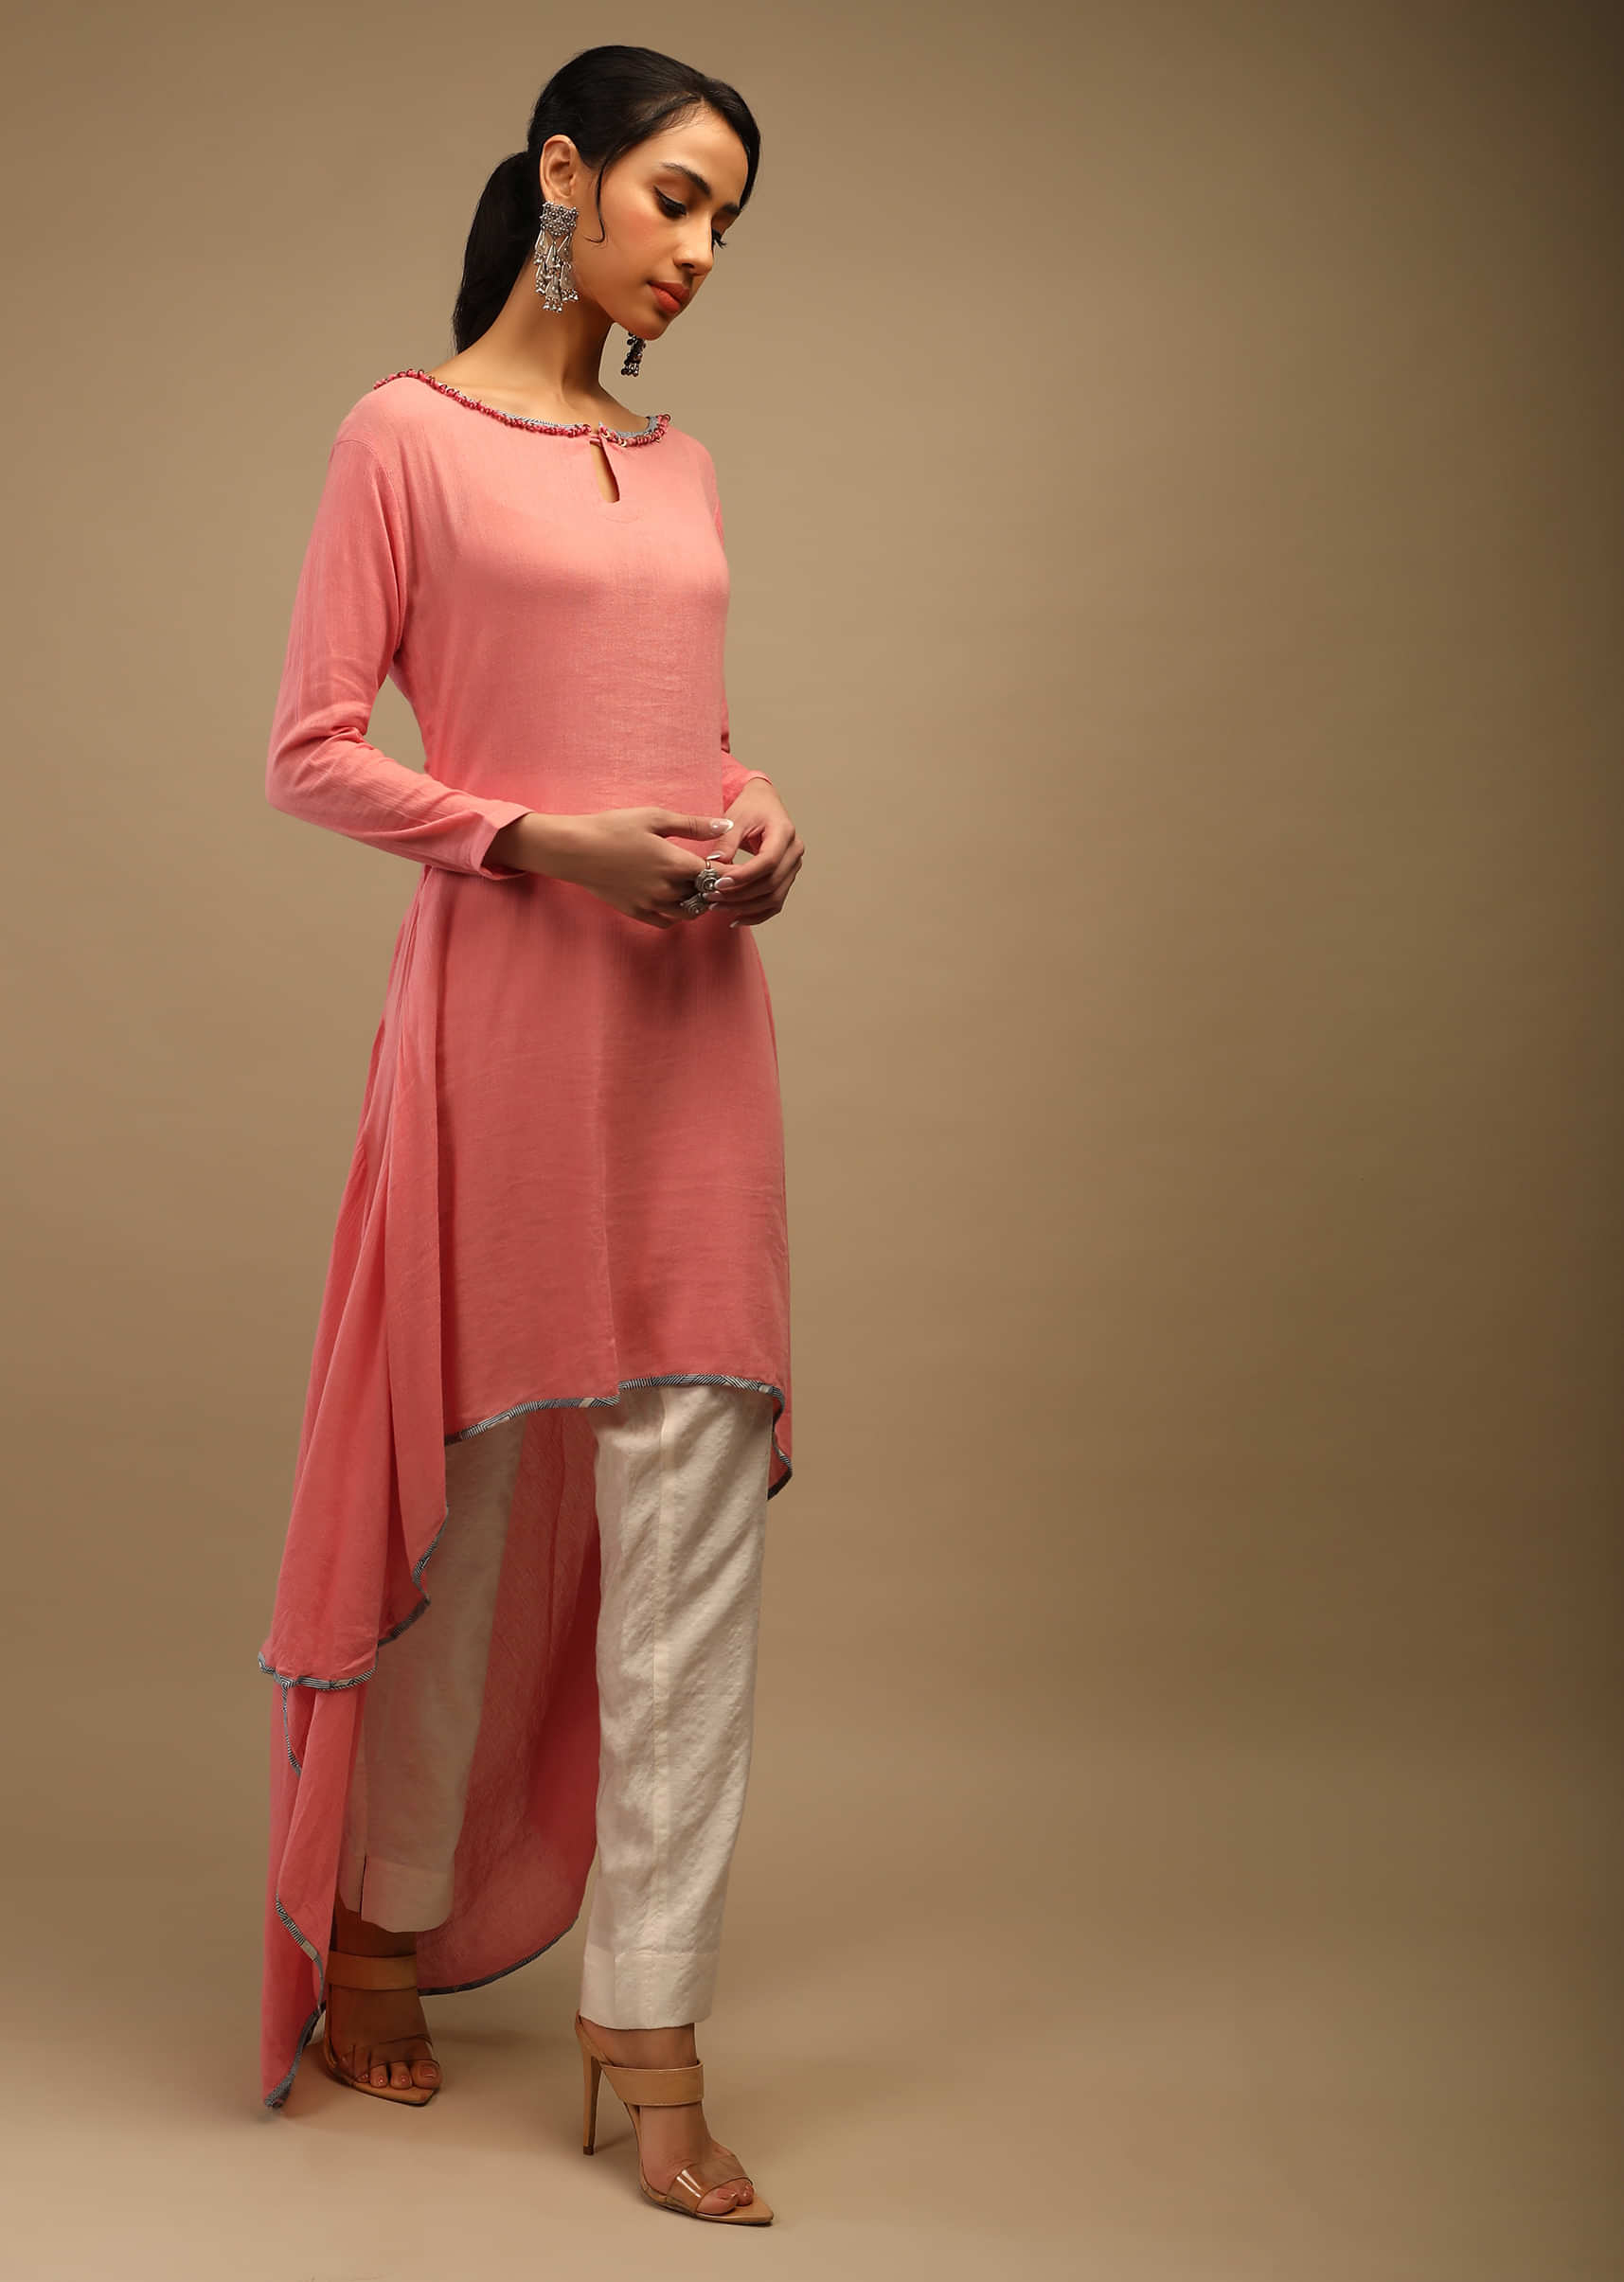 Peach Tunic In Chiffon With High Low Hemline And Sequins Work On The Neckline 